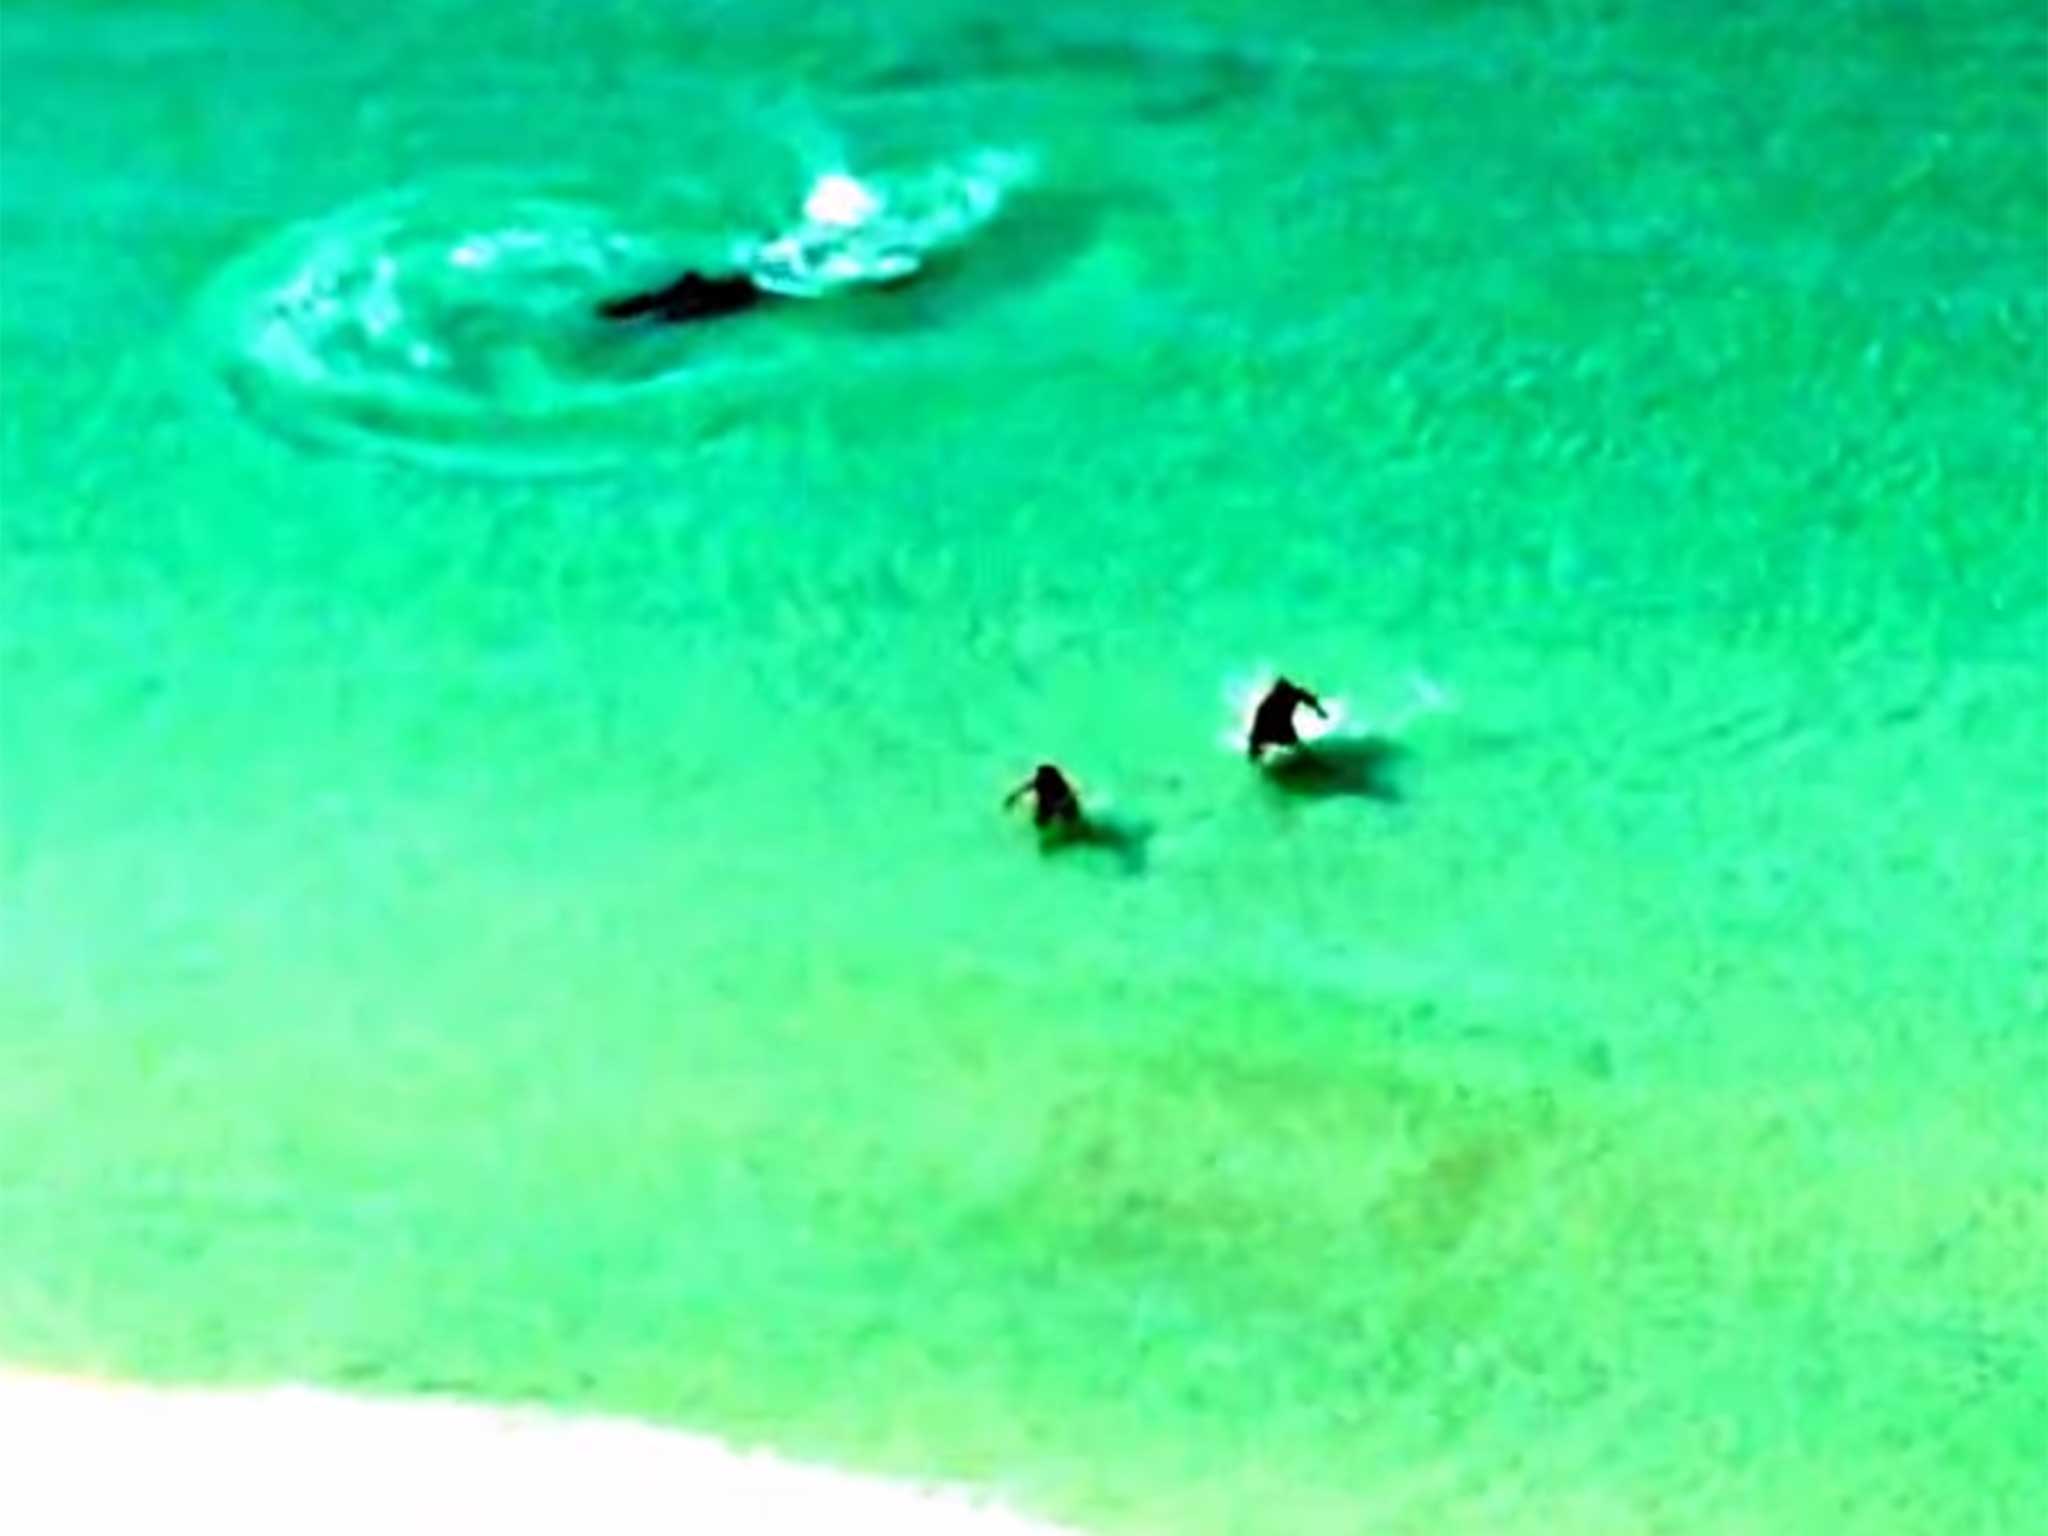 The individuals run towards the safety of the beach, after being alerted to the shark